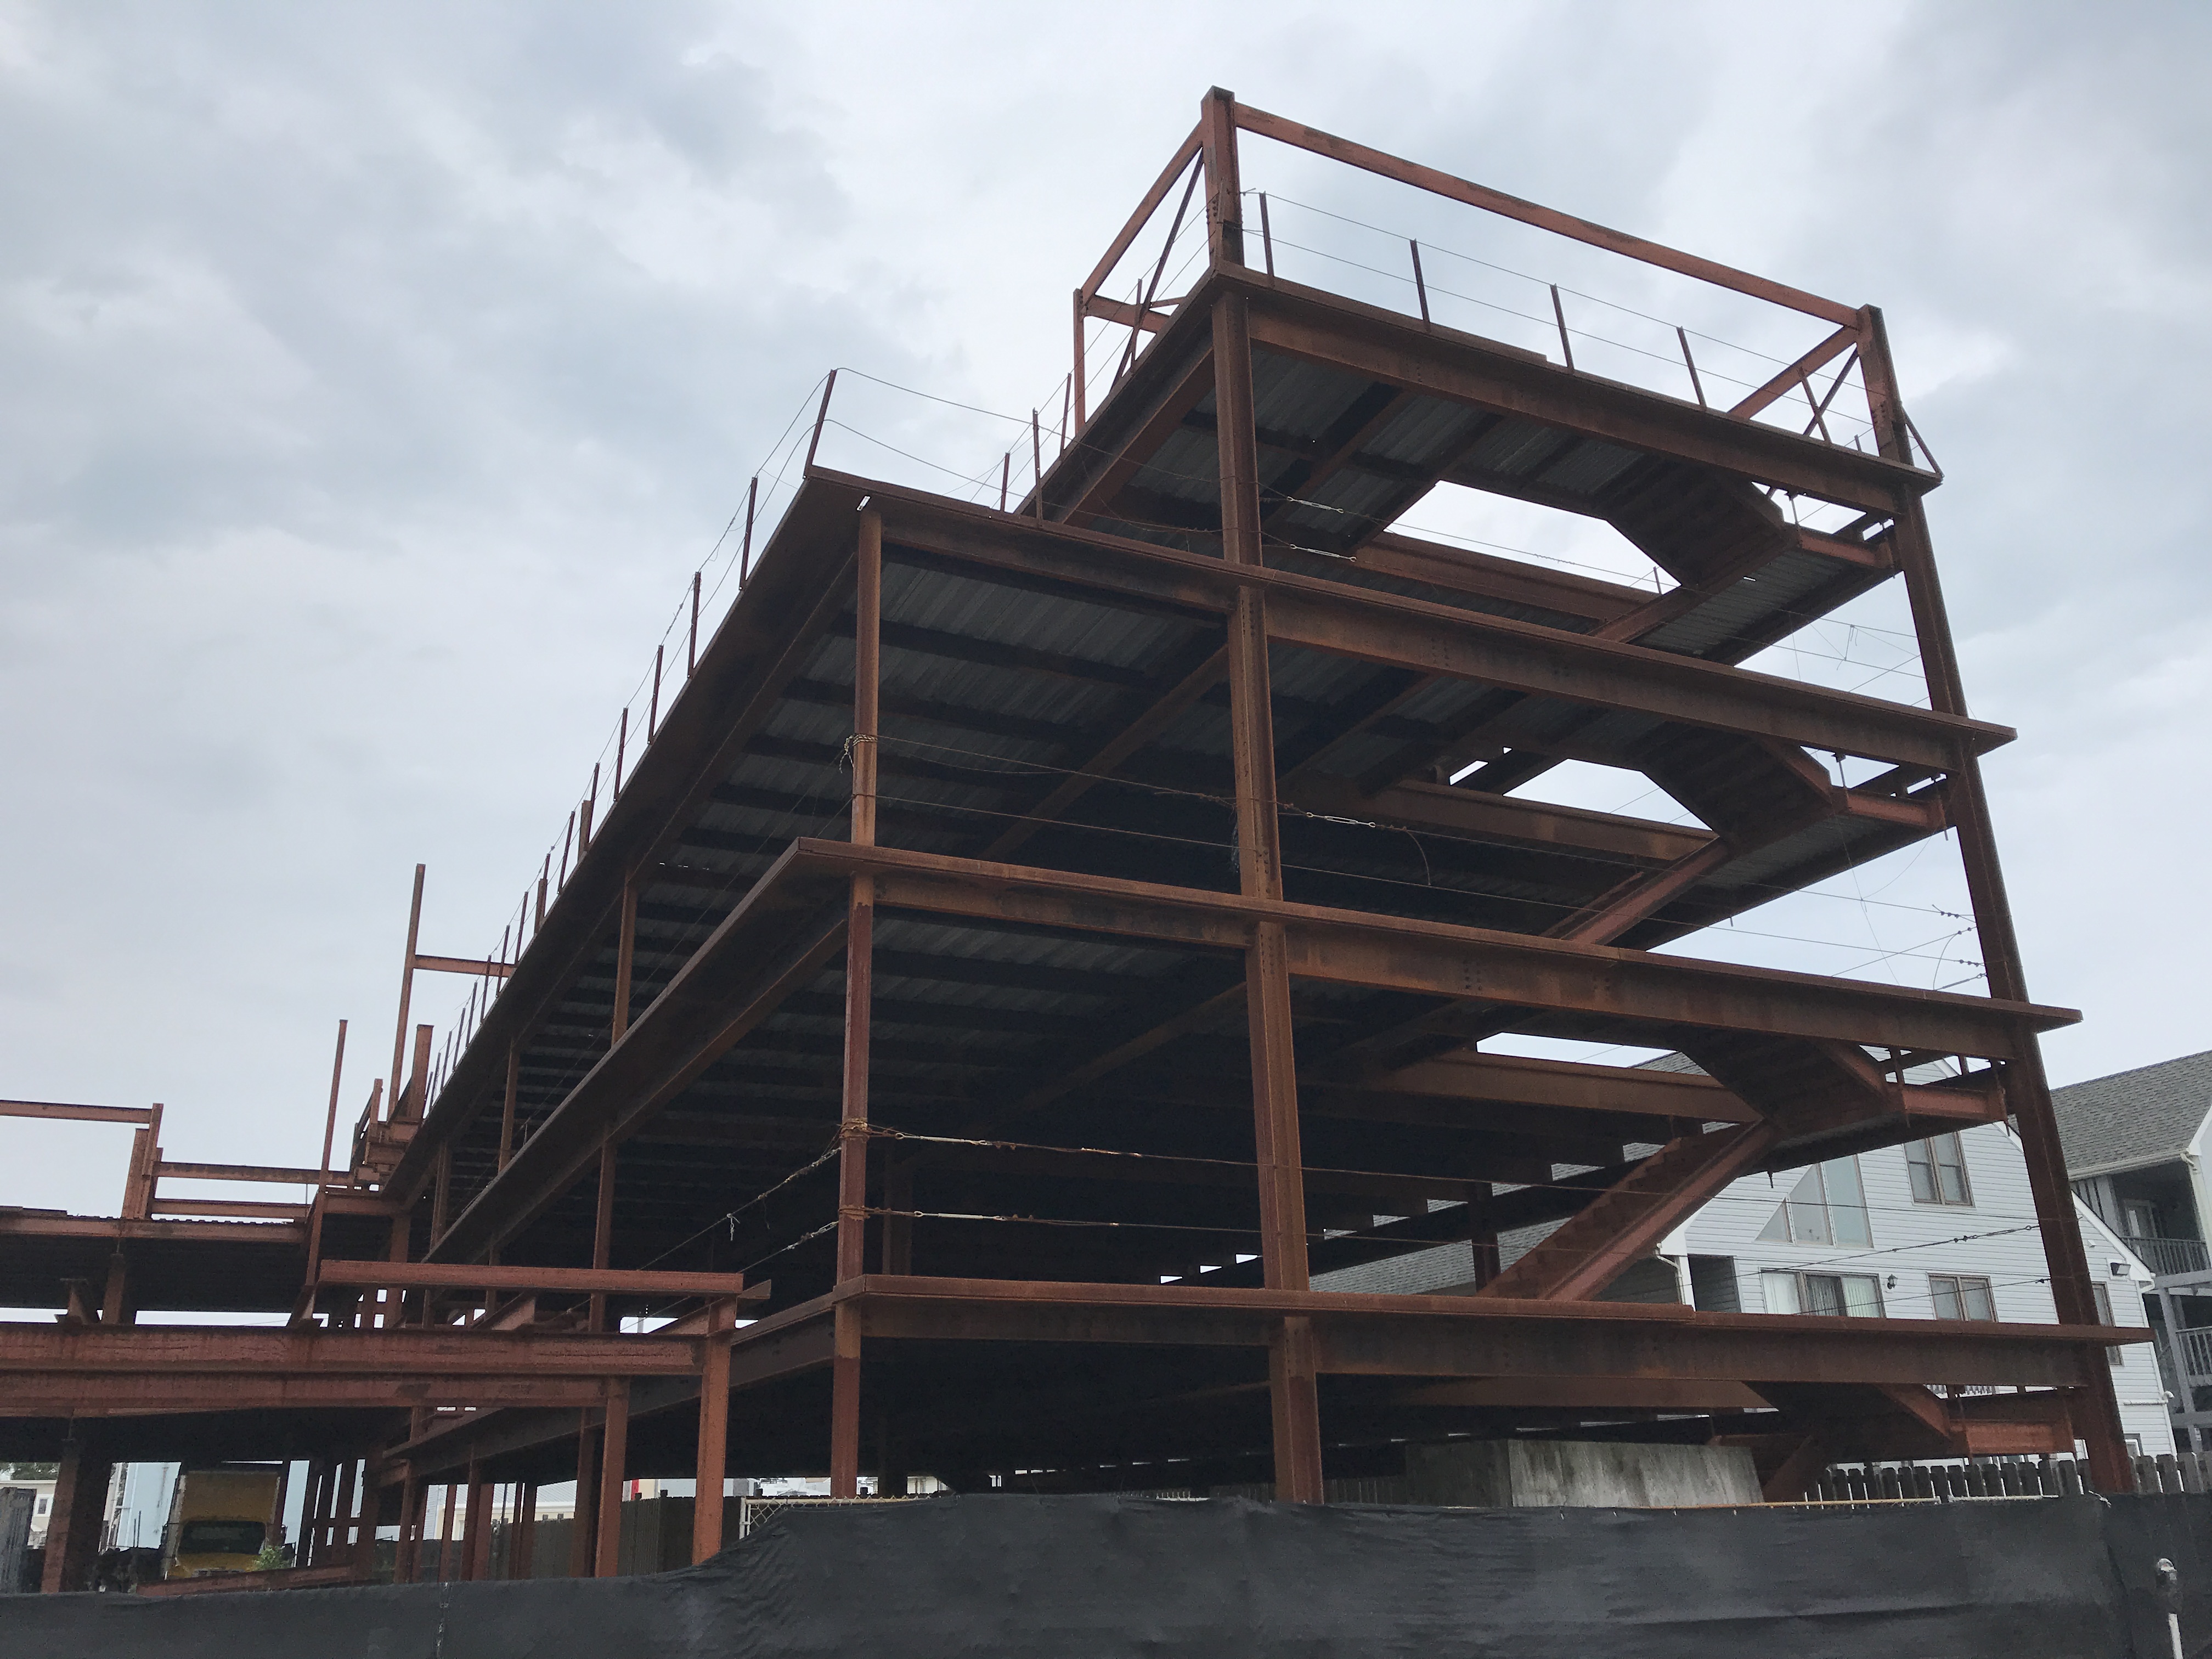 The steel structure at the Boulevard and Hamilton Avenue in Seaside Heights, June 5, 2019. (Photo: Daniel Nee)